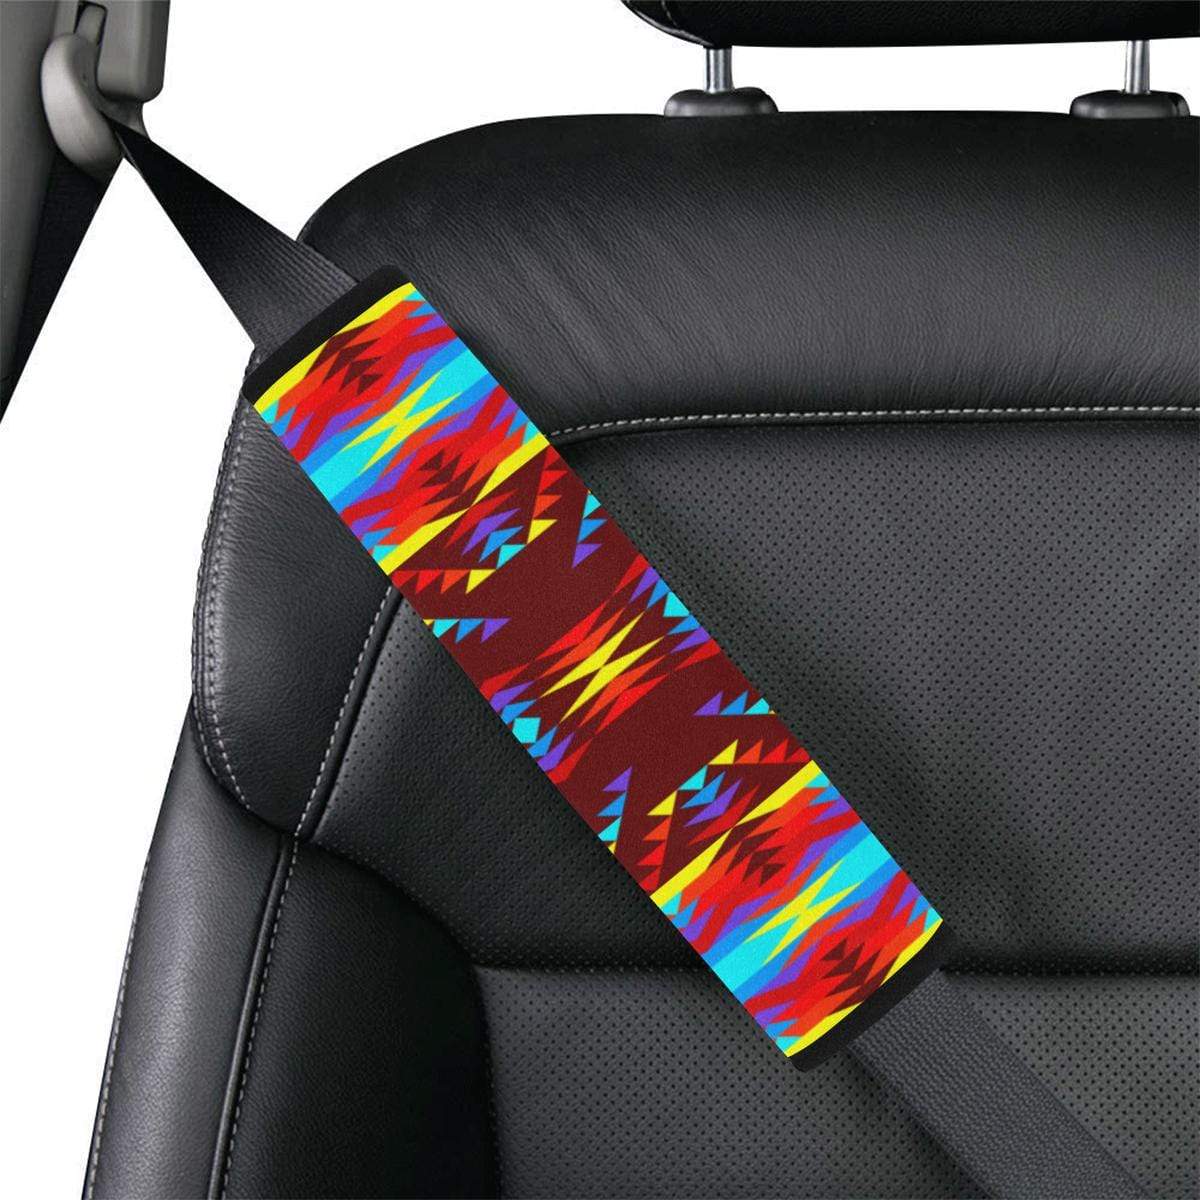 Visions of Lasting Peace Car Seat Belt Cover 7''x12.6'' Car Seat Belt Cover 7''x12.6'' e-joyer 